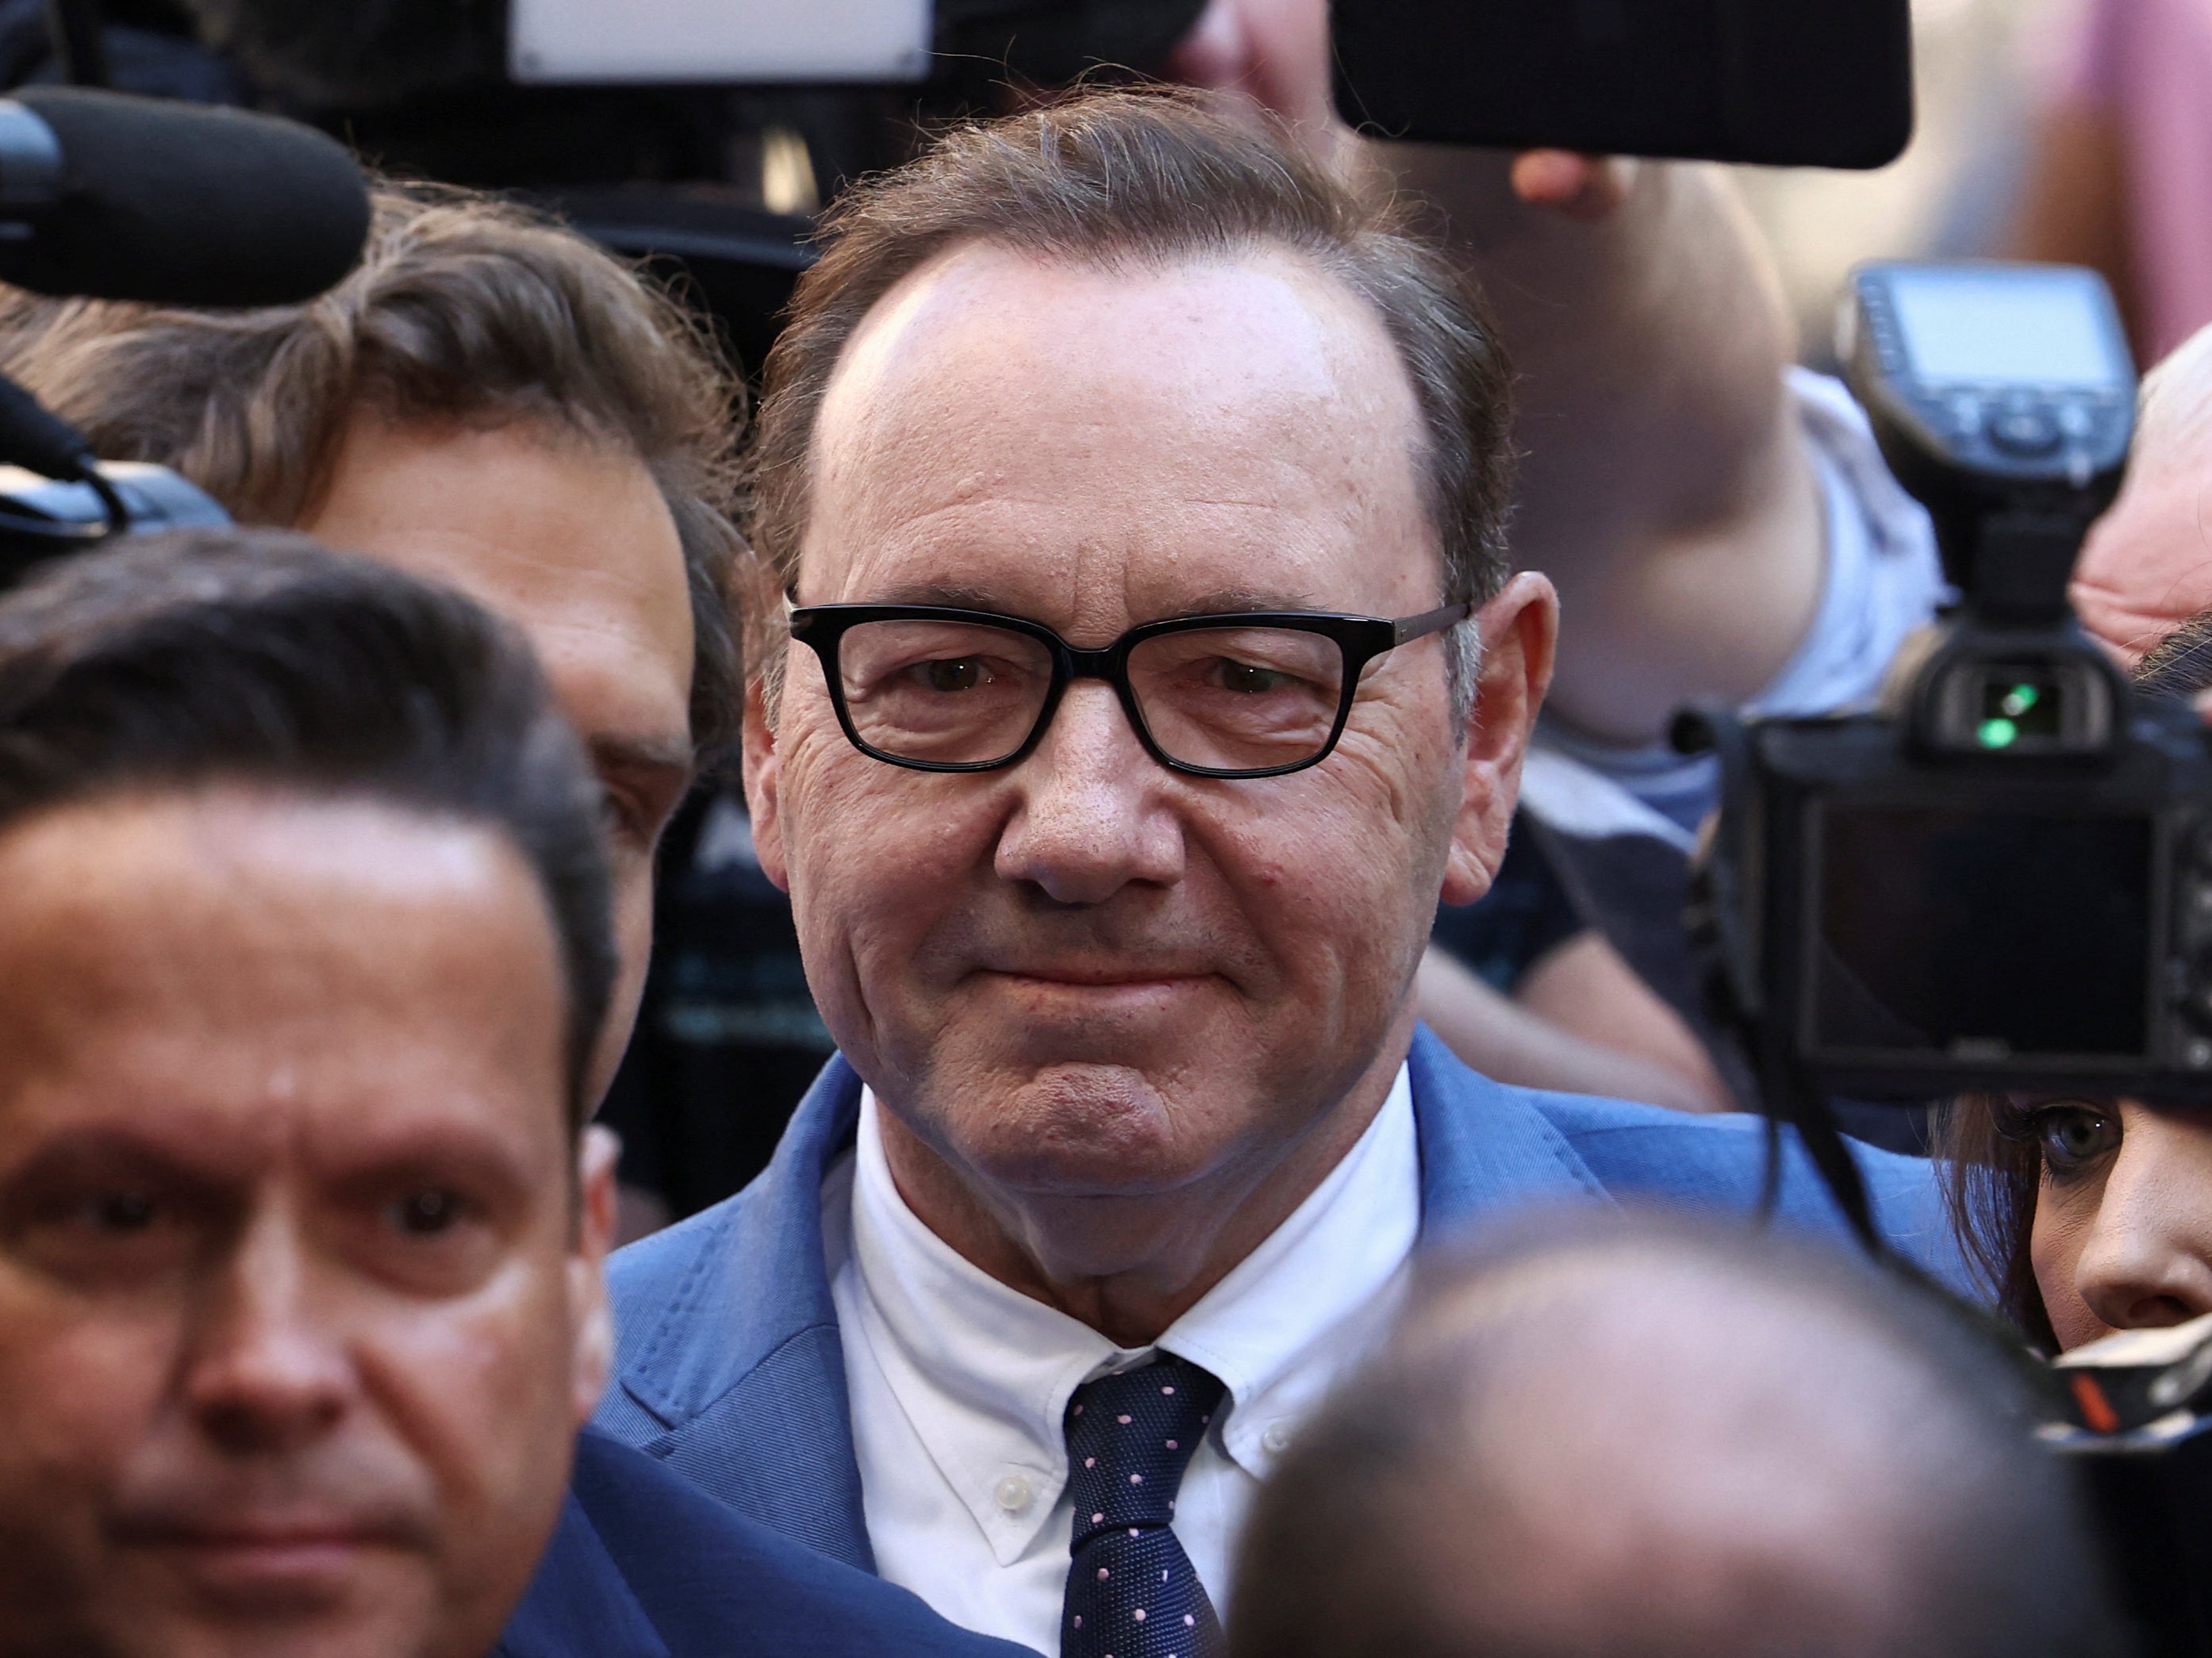 Actor Kevin Spacey has arrived at Westminster Magistrates’ Court where he faces sexual assault charges against three men